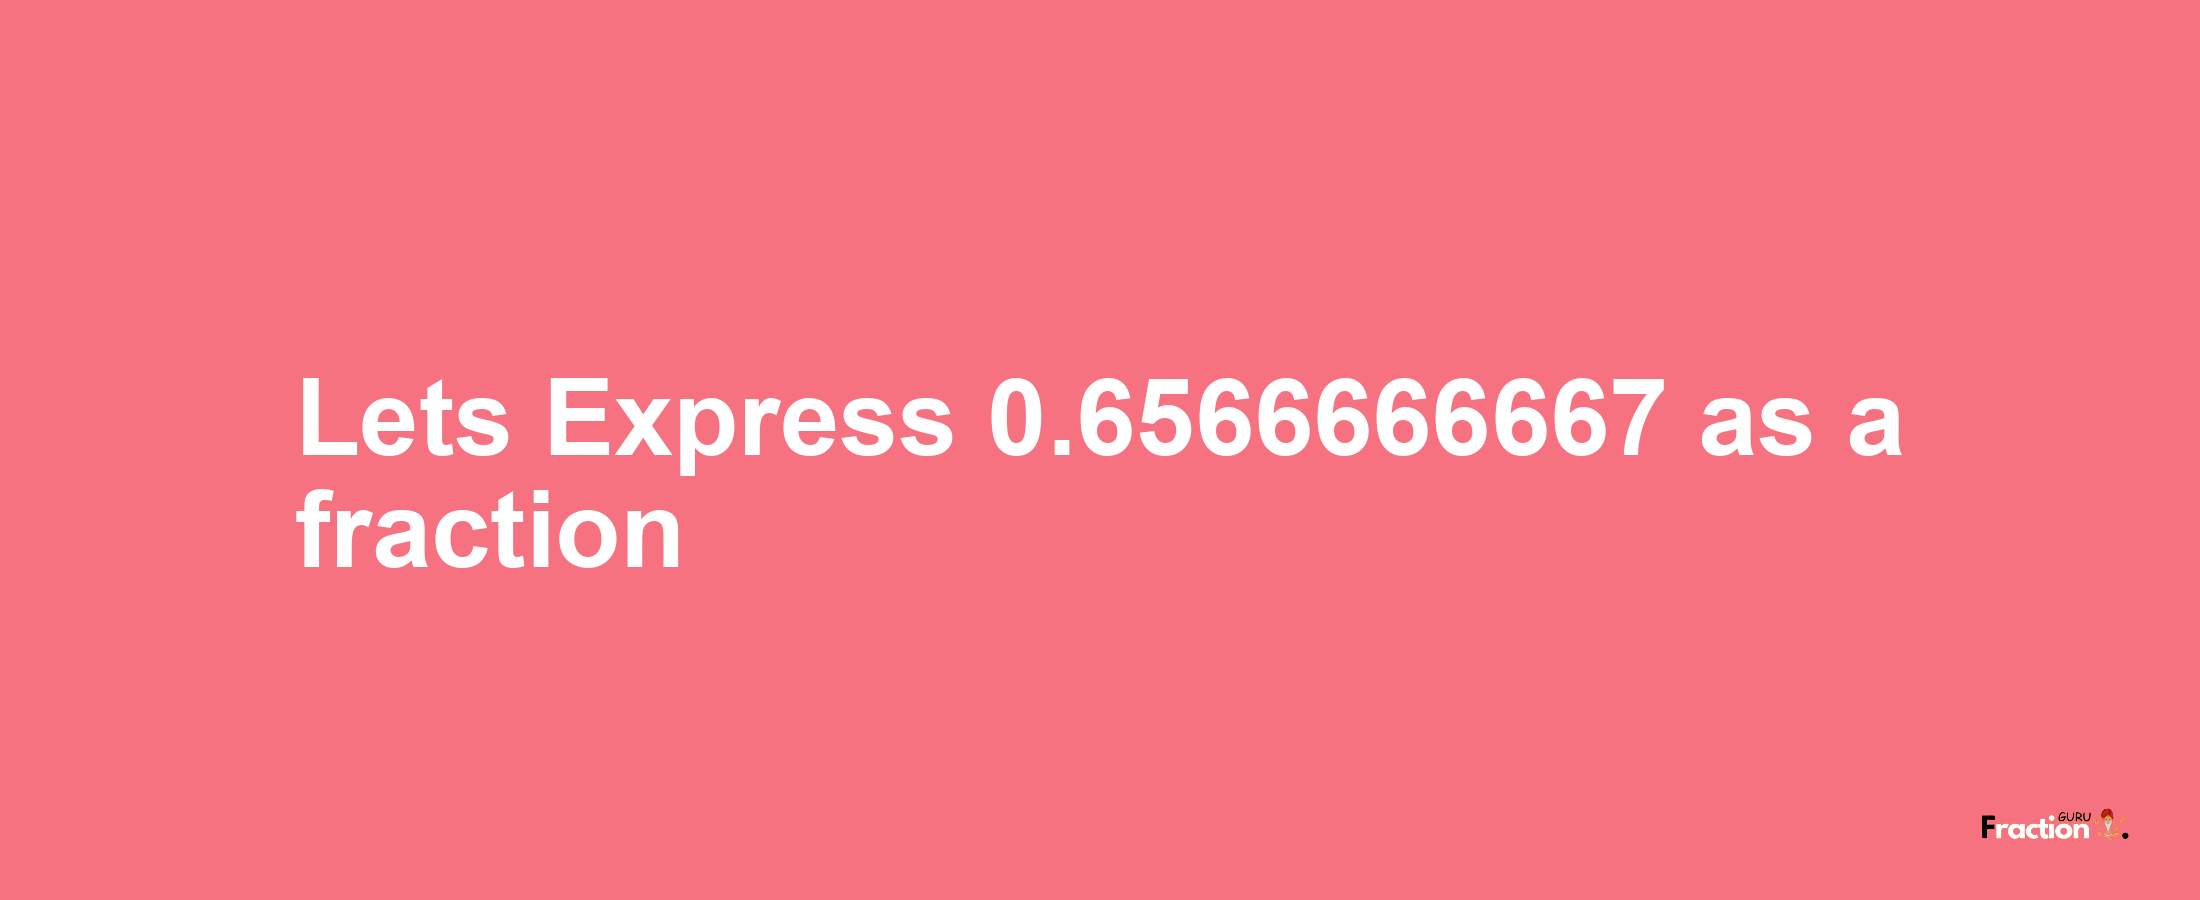 Lets Express 0.6566666667 as afraction